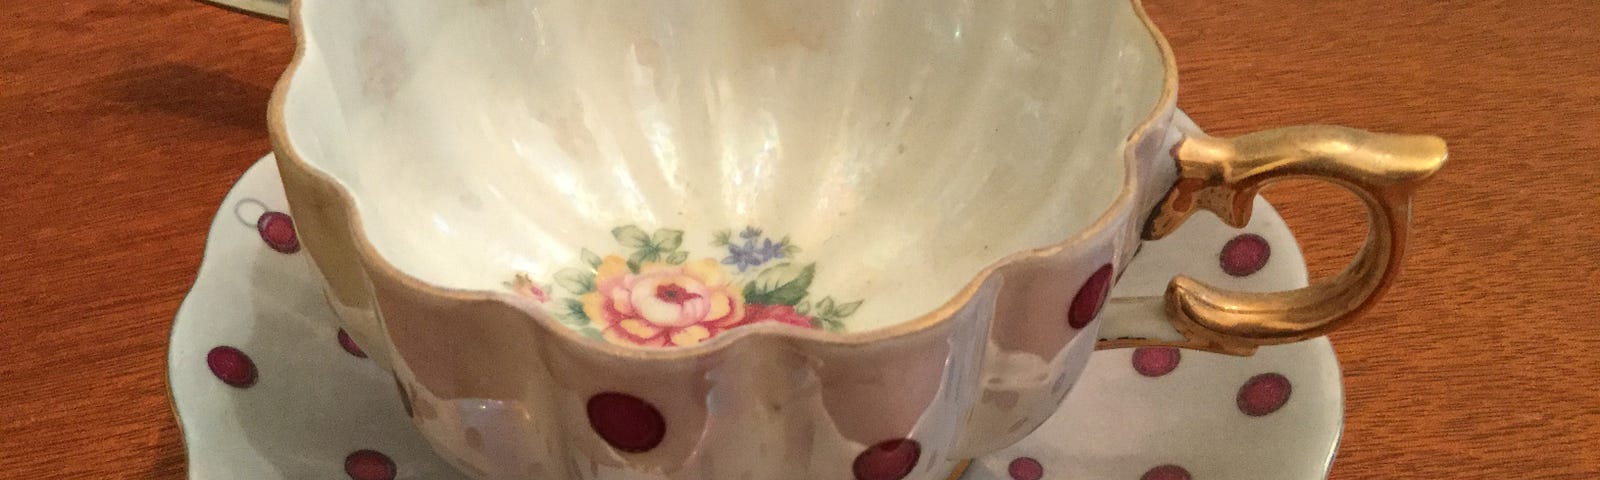 A vintage cup and saucer with gilt edges and a red polka dot pattern.